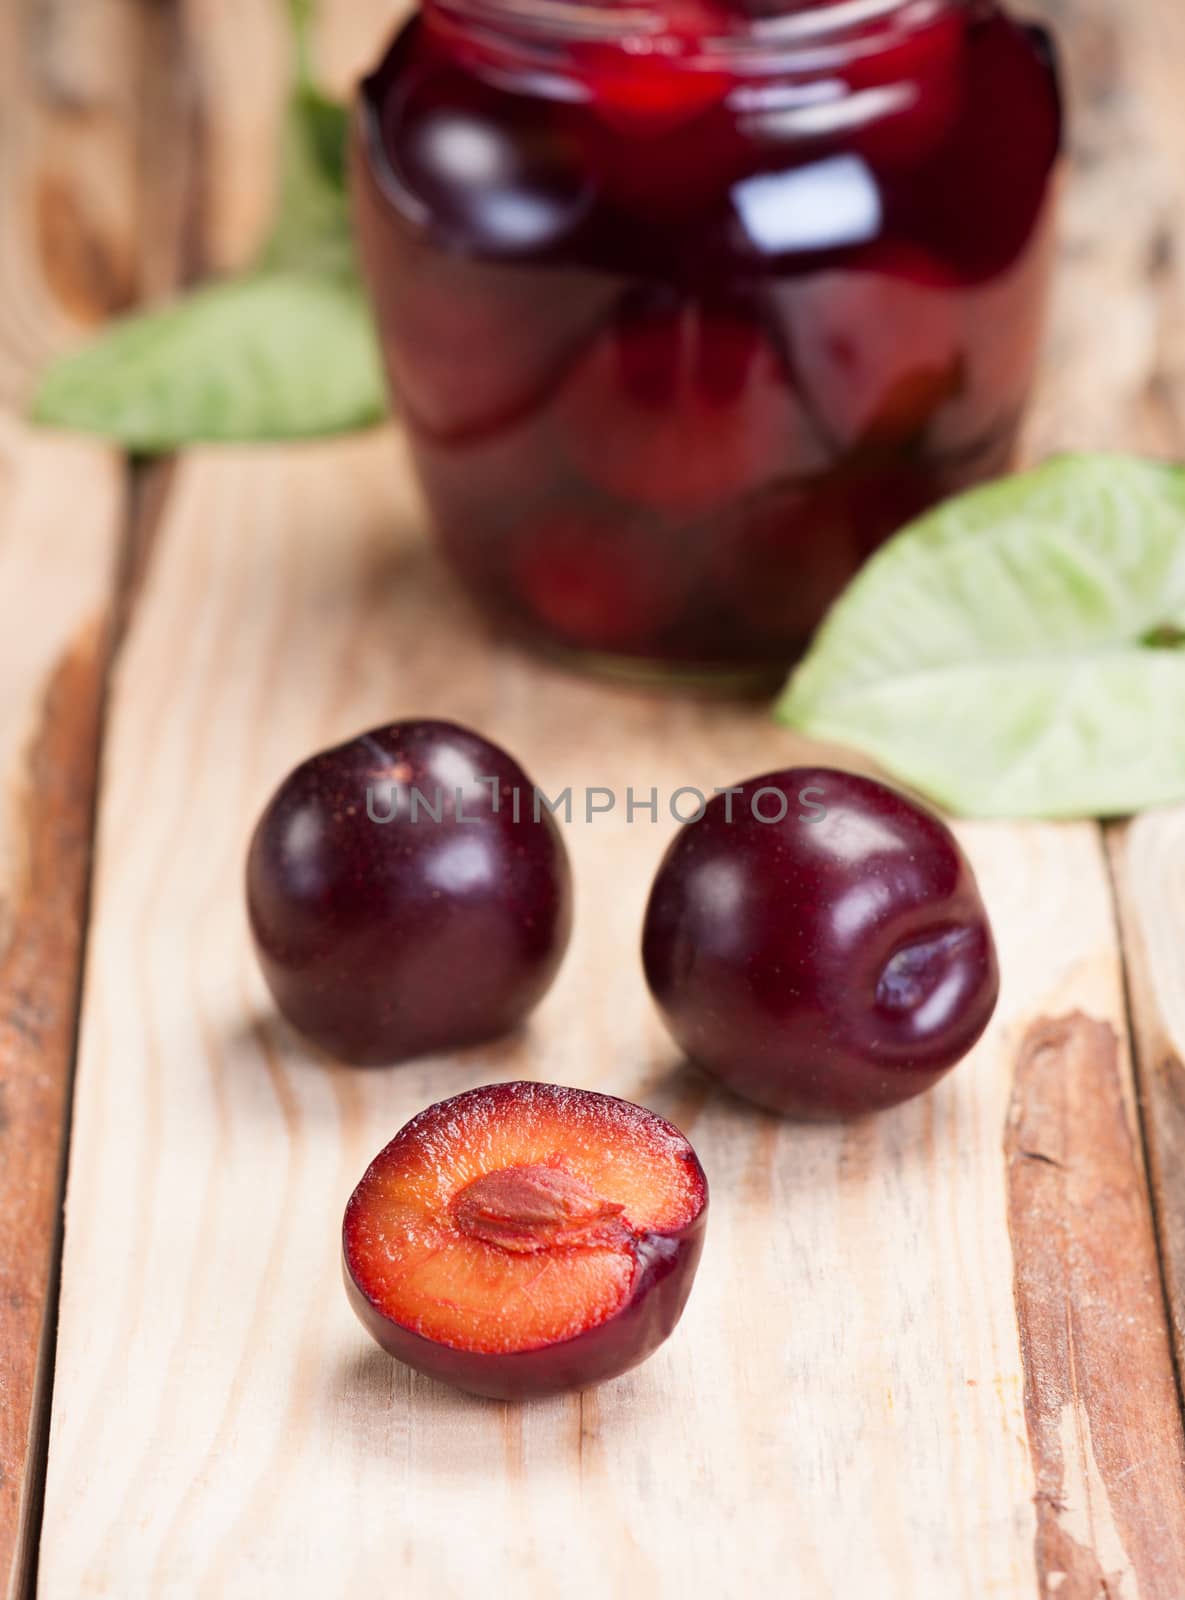 Plums on rough wooden table close-up. In background glass jar with jam.